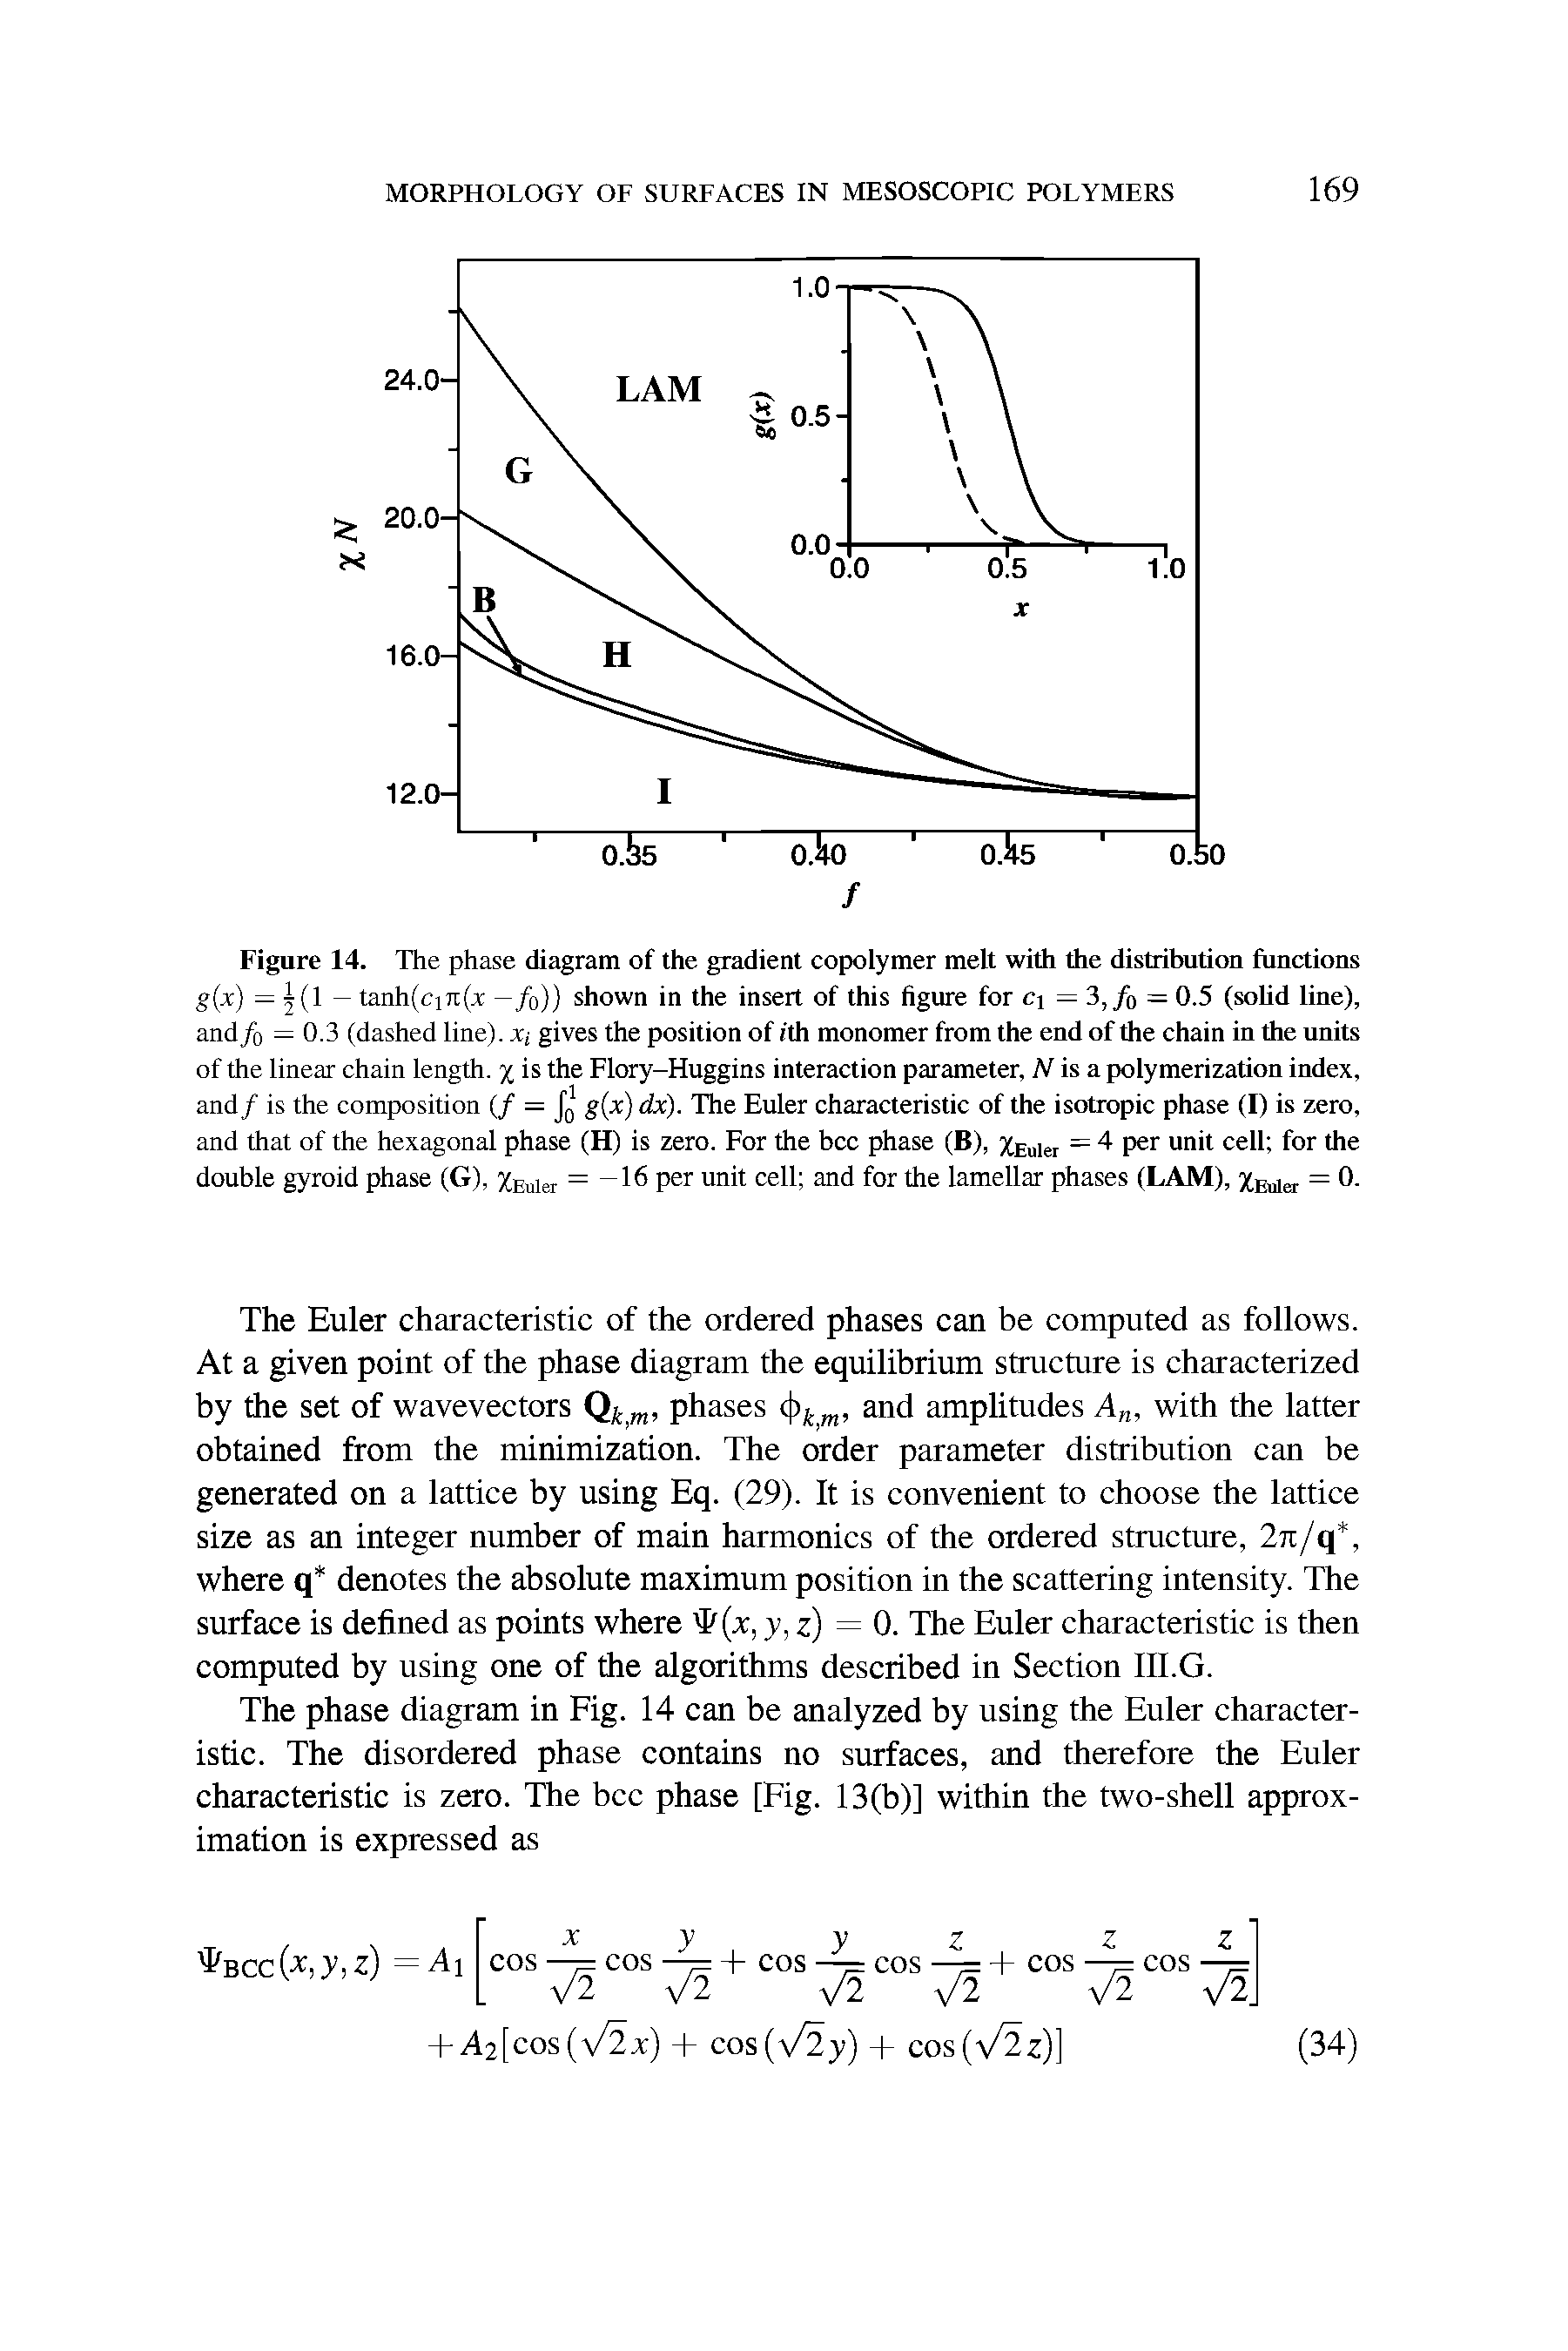 Figure 14. The phase diagram of the gradient copolymer melt with the distribution functions g(x) = l — tanh(ciit(x —fo)) shown in the insert of this figure for ci = 3,/o = 0.5 (solid line), and/o — 0.3 (dashed line), x gives the position of ith monomer from the end of the chain in the units of the linear chain length. % is the Flory-Huggins interaction parameter, N is a polymerization index, and/ is the composition (/ = J0 g(x) dx). The Euler characteristic of the isotropic phase (I) is zero, and that of the hexagonal phase (H) is zero. For the bcc phase (B), XEuier = 4 per unit cell for the double gyroid phase (G), XEuier = -16 per unit cell and for the lamellar phases (LAM), XEuier = 0.